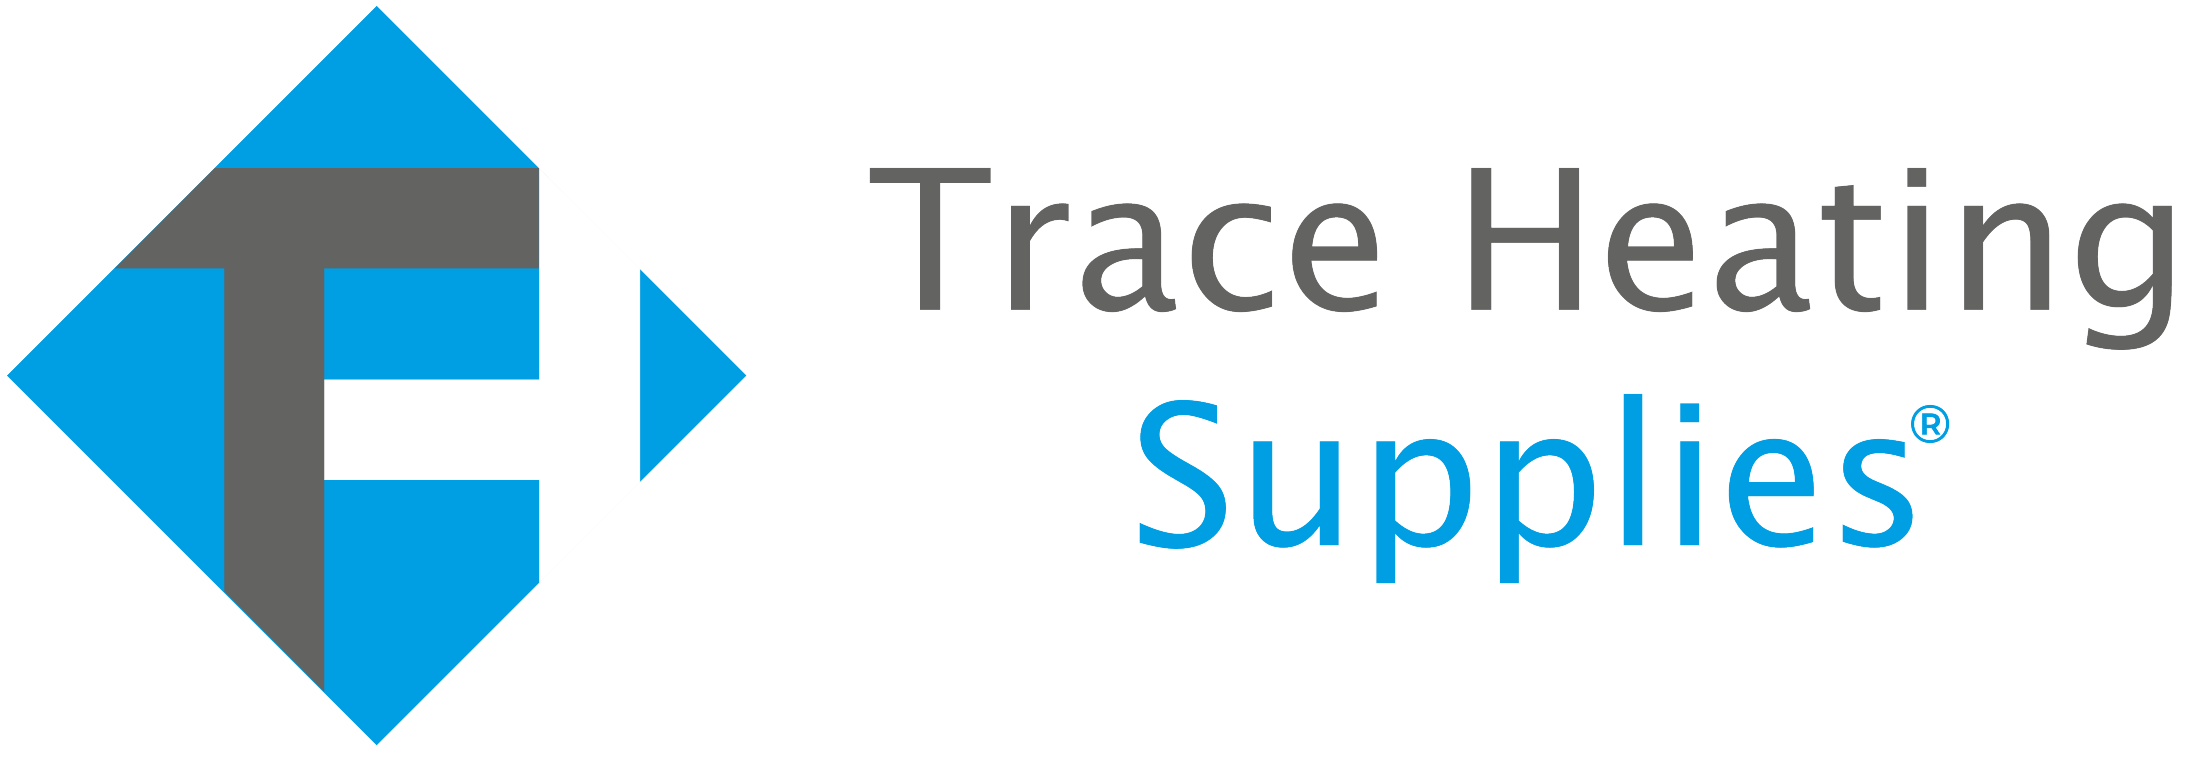 Trace Heating Supplies logo